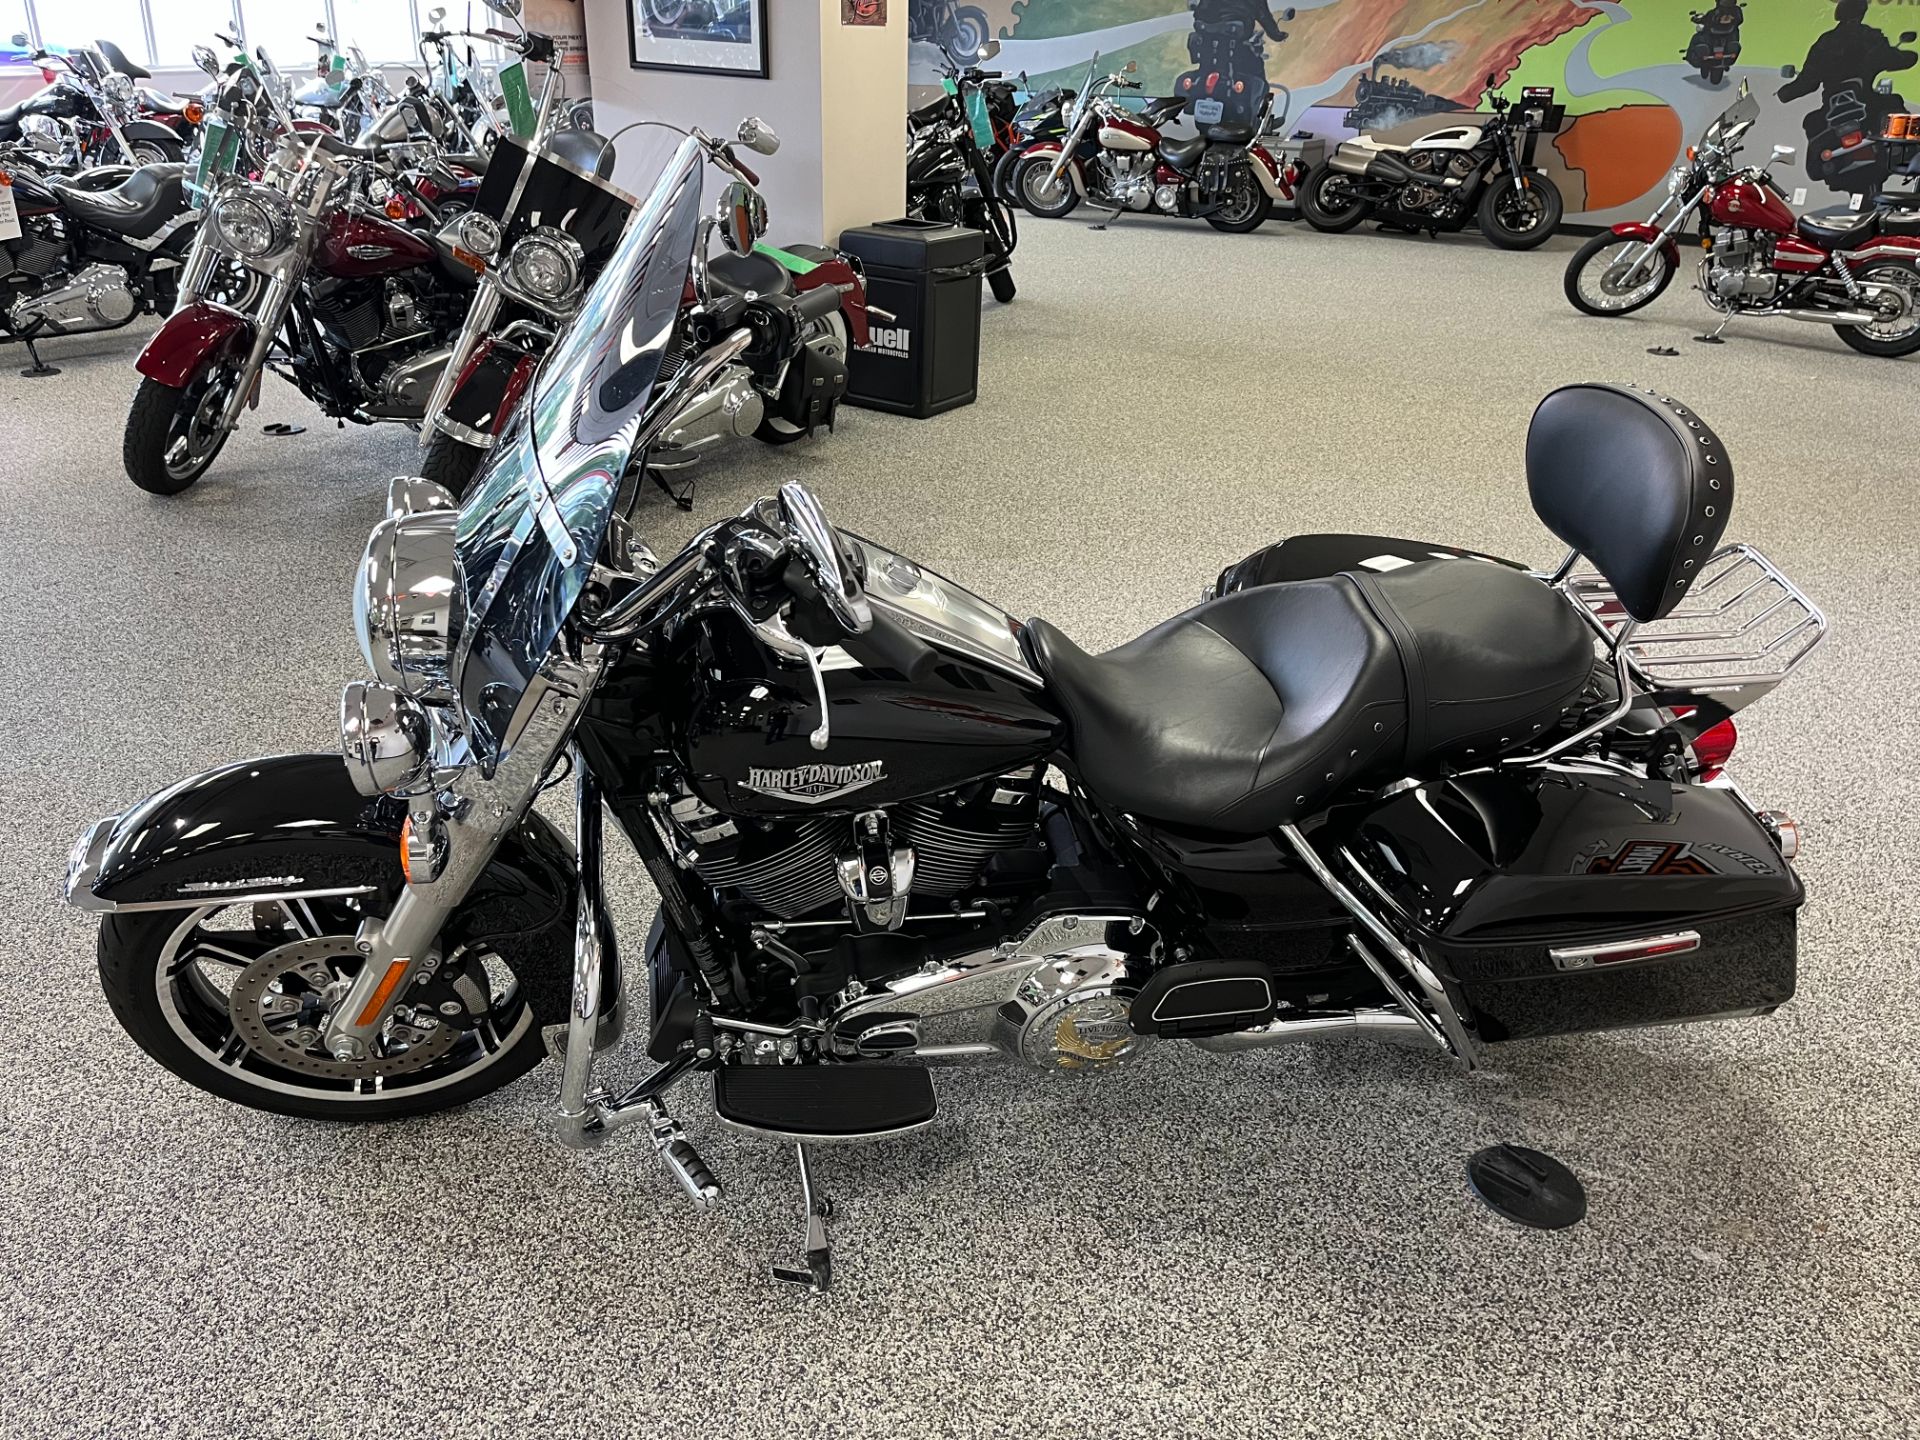 2020 Harley-Davidson ROAD KING in Knoxville, Tennessee - Photo 5